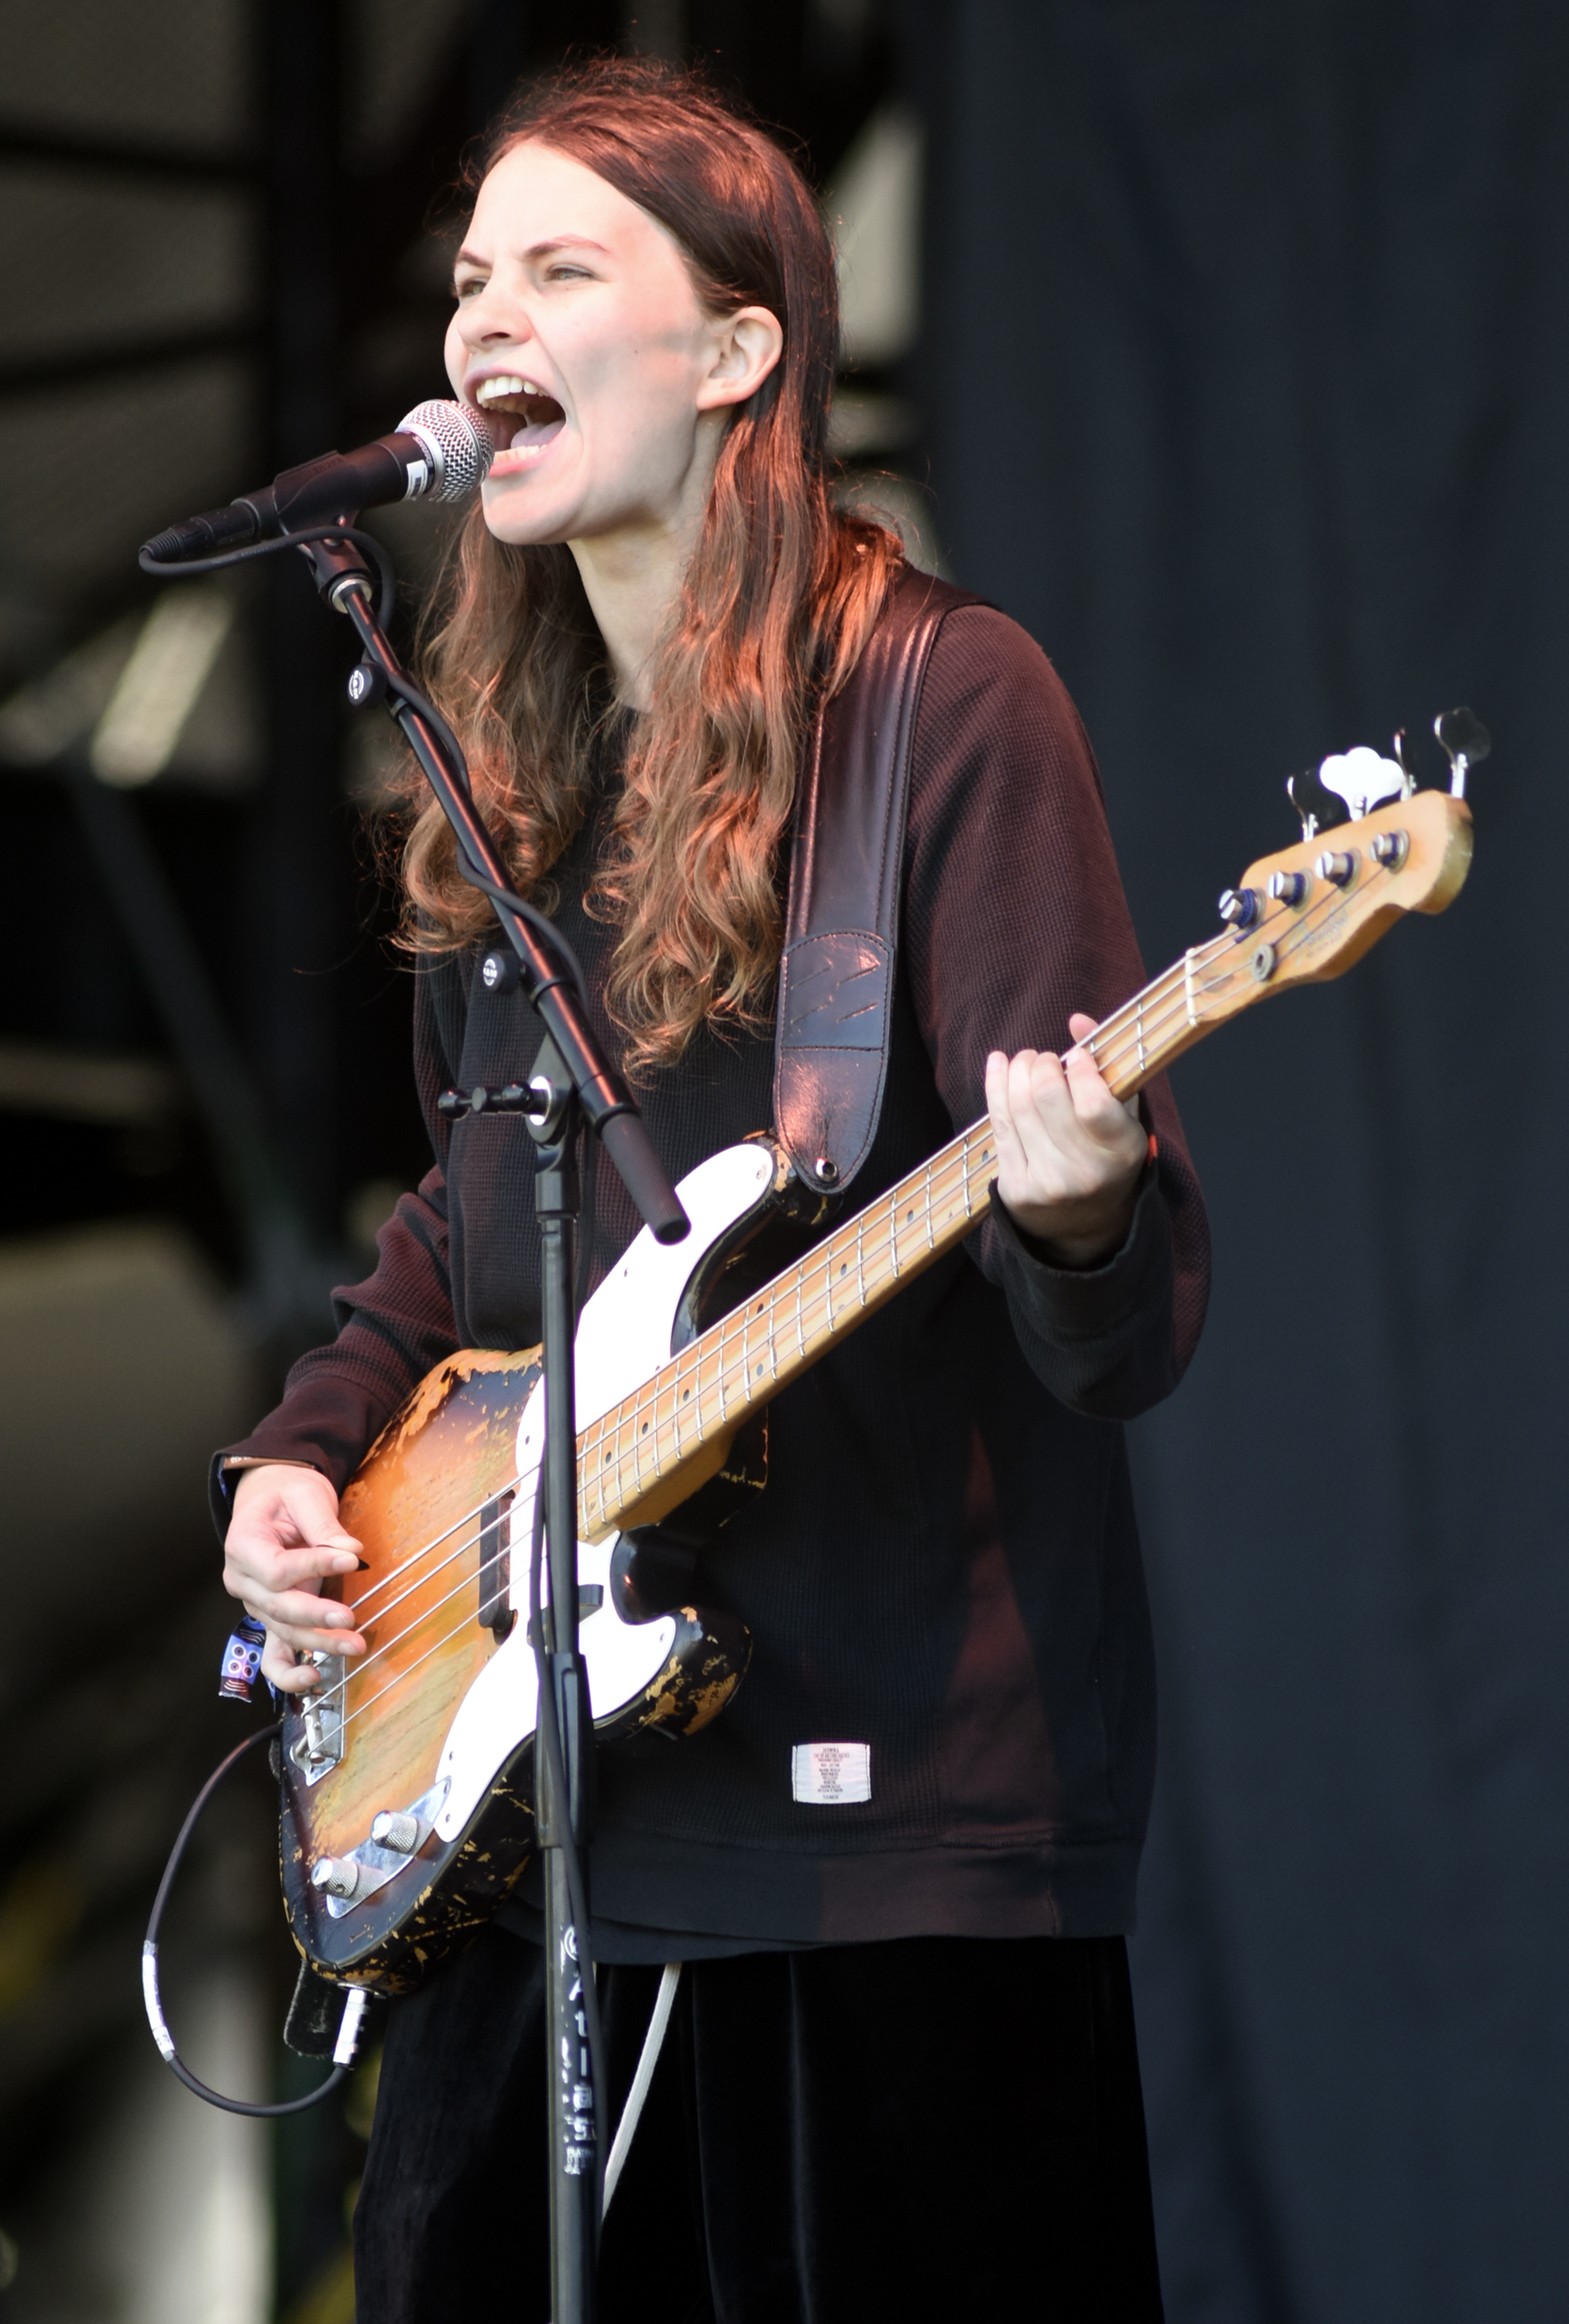 Eliot Sumner performs onstage on September 30, 2016 in Austin, Texas | Source: Getty Images